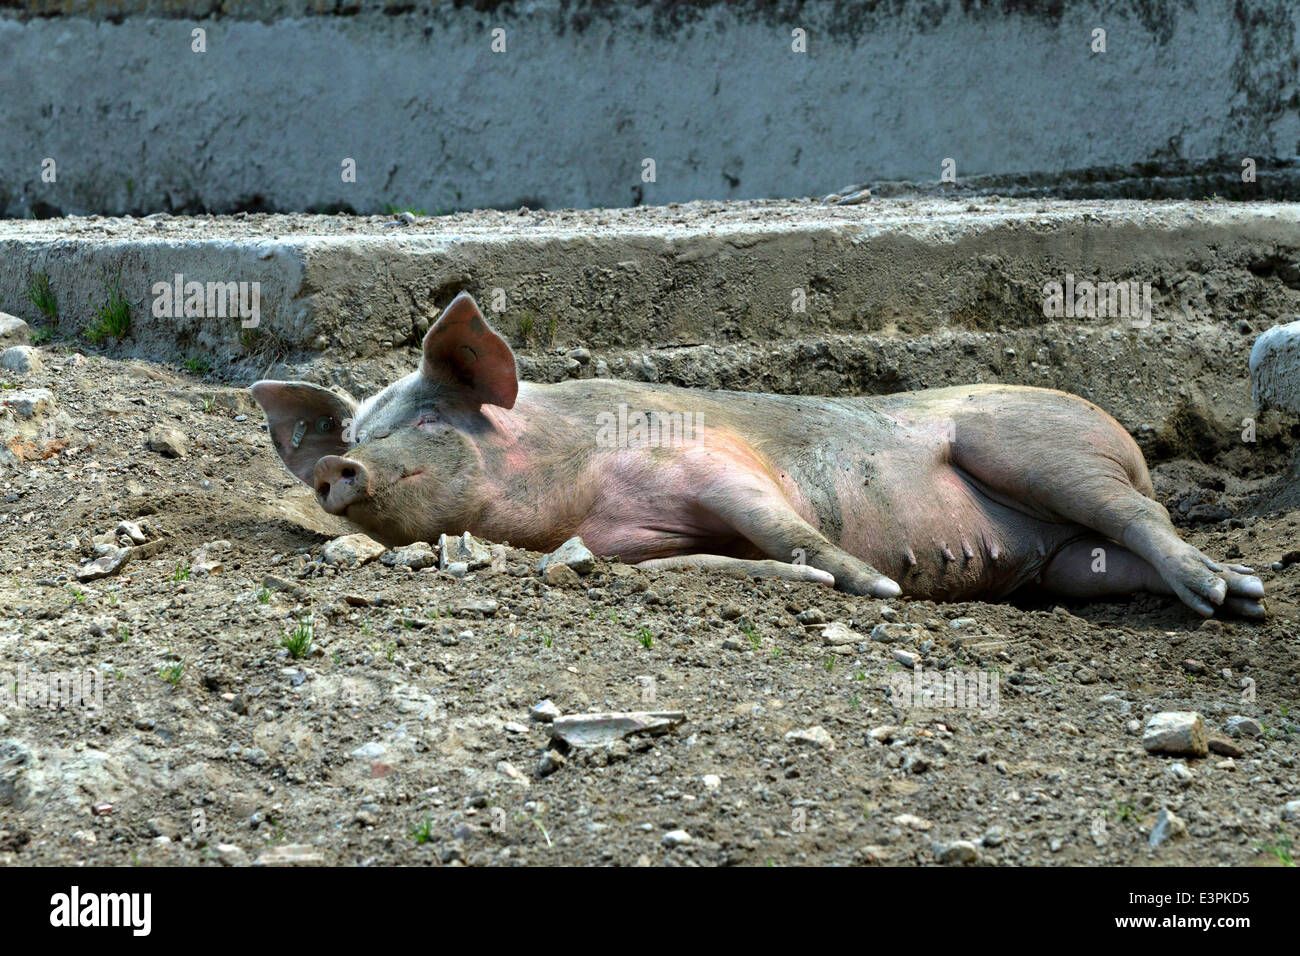 Domestic pig laying on ground with on farm, Chiemgau, Upper Bavaria, Germany, Europe. June 2014 Stock Photo